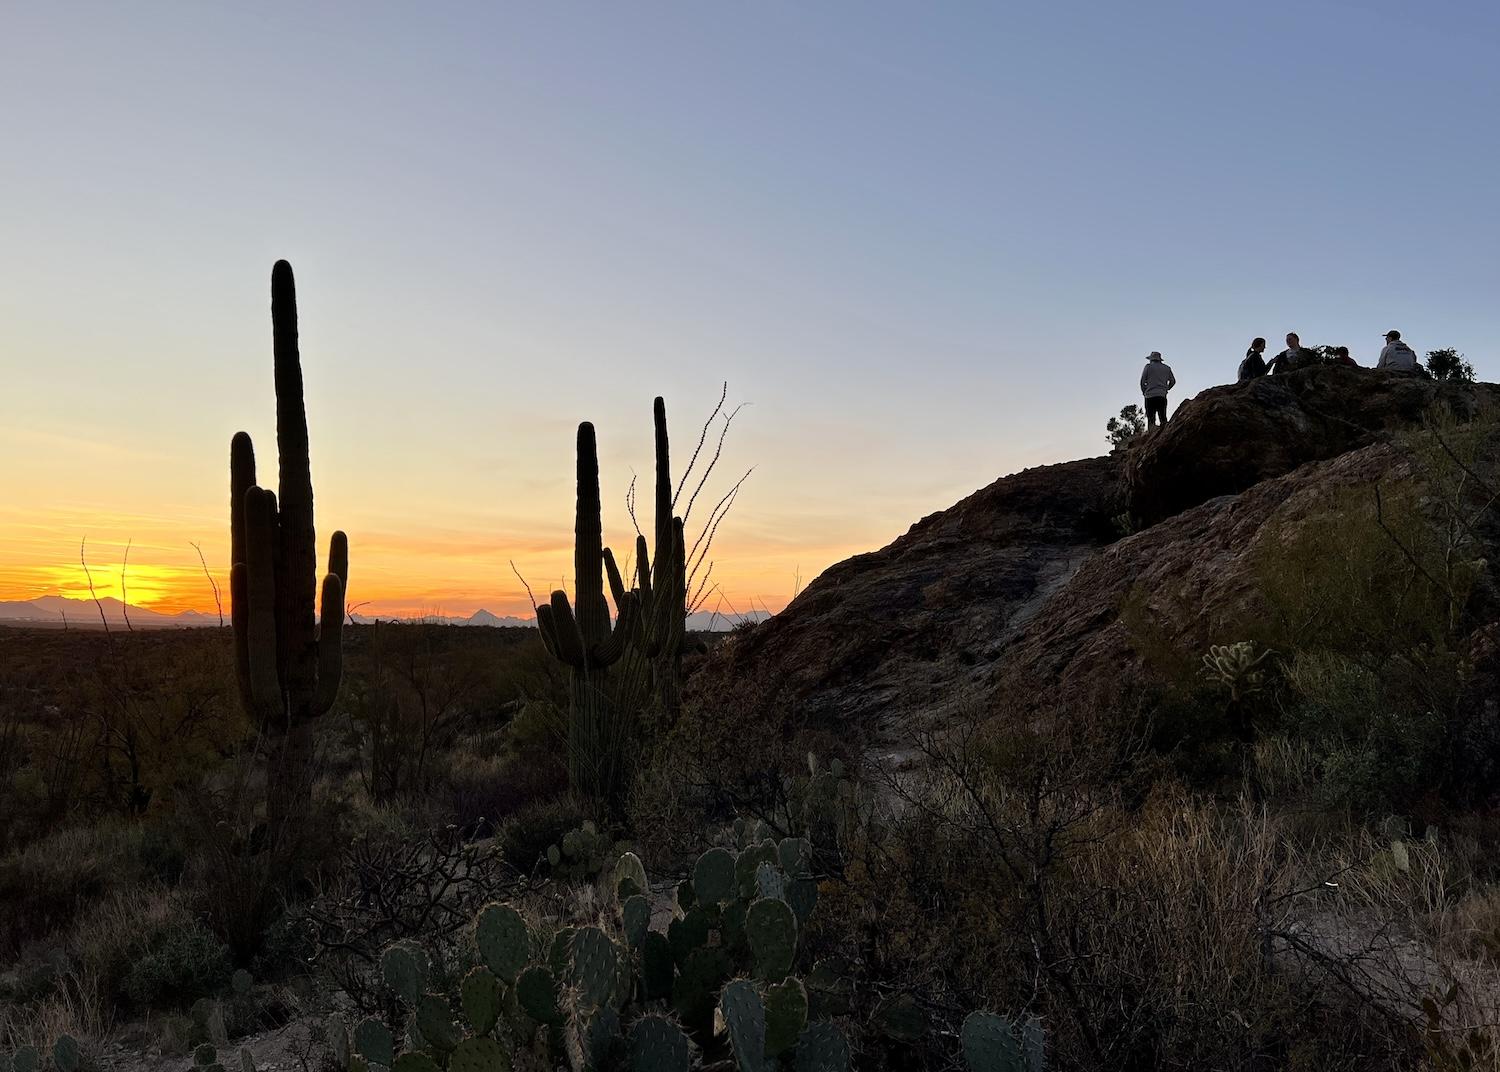 People gather on the Javelina Rocks in Saguaro National Park to watch the sun set over Tucson.